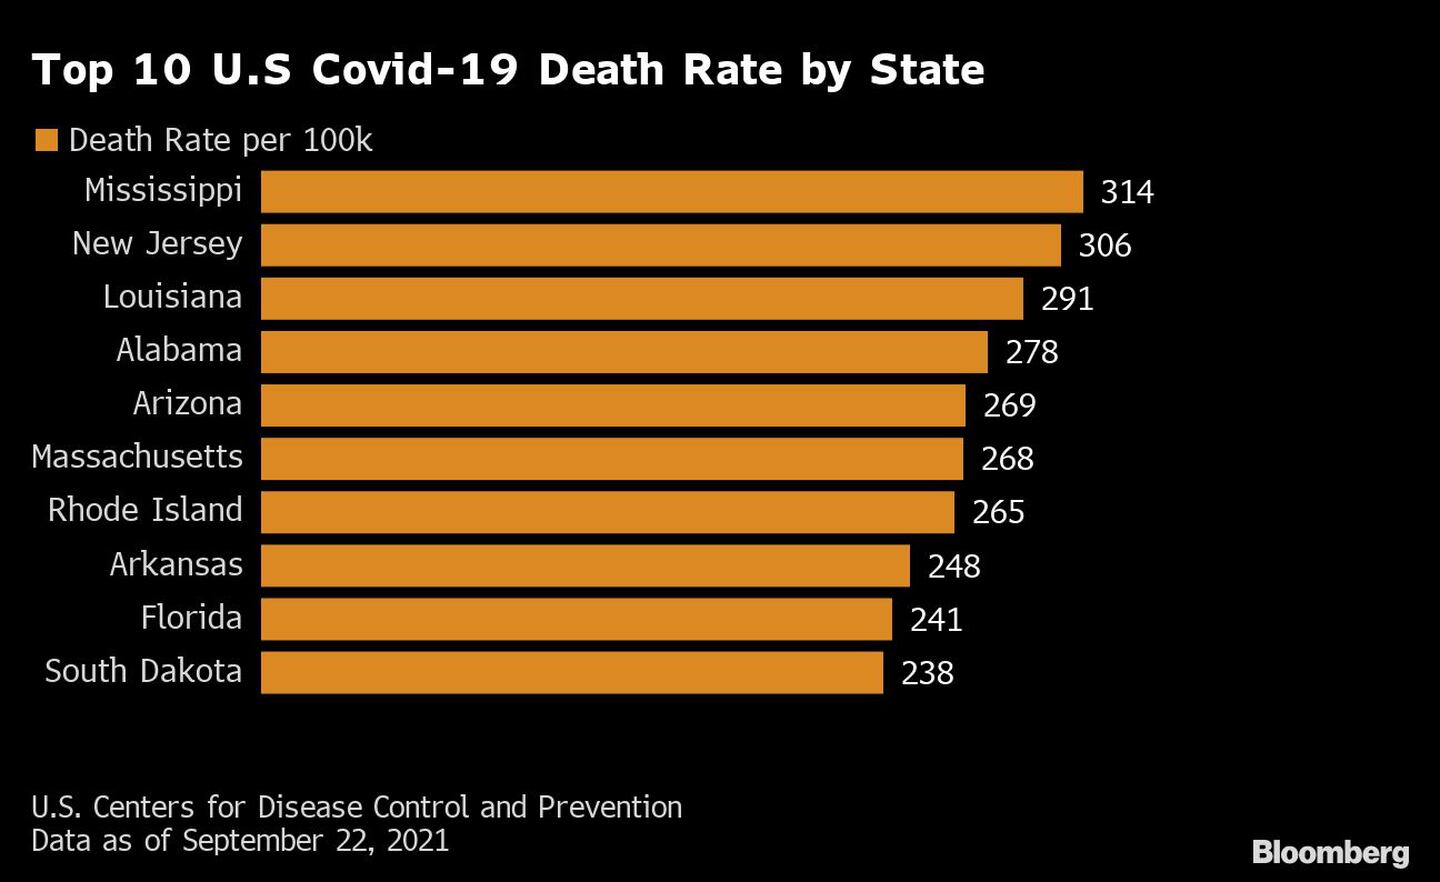 Top 10 U.S Covid-19 Death Rate by Statedfd